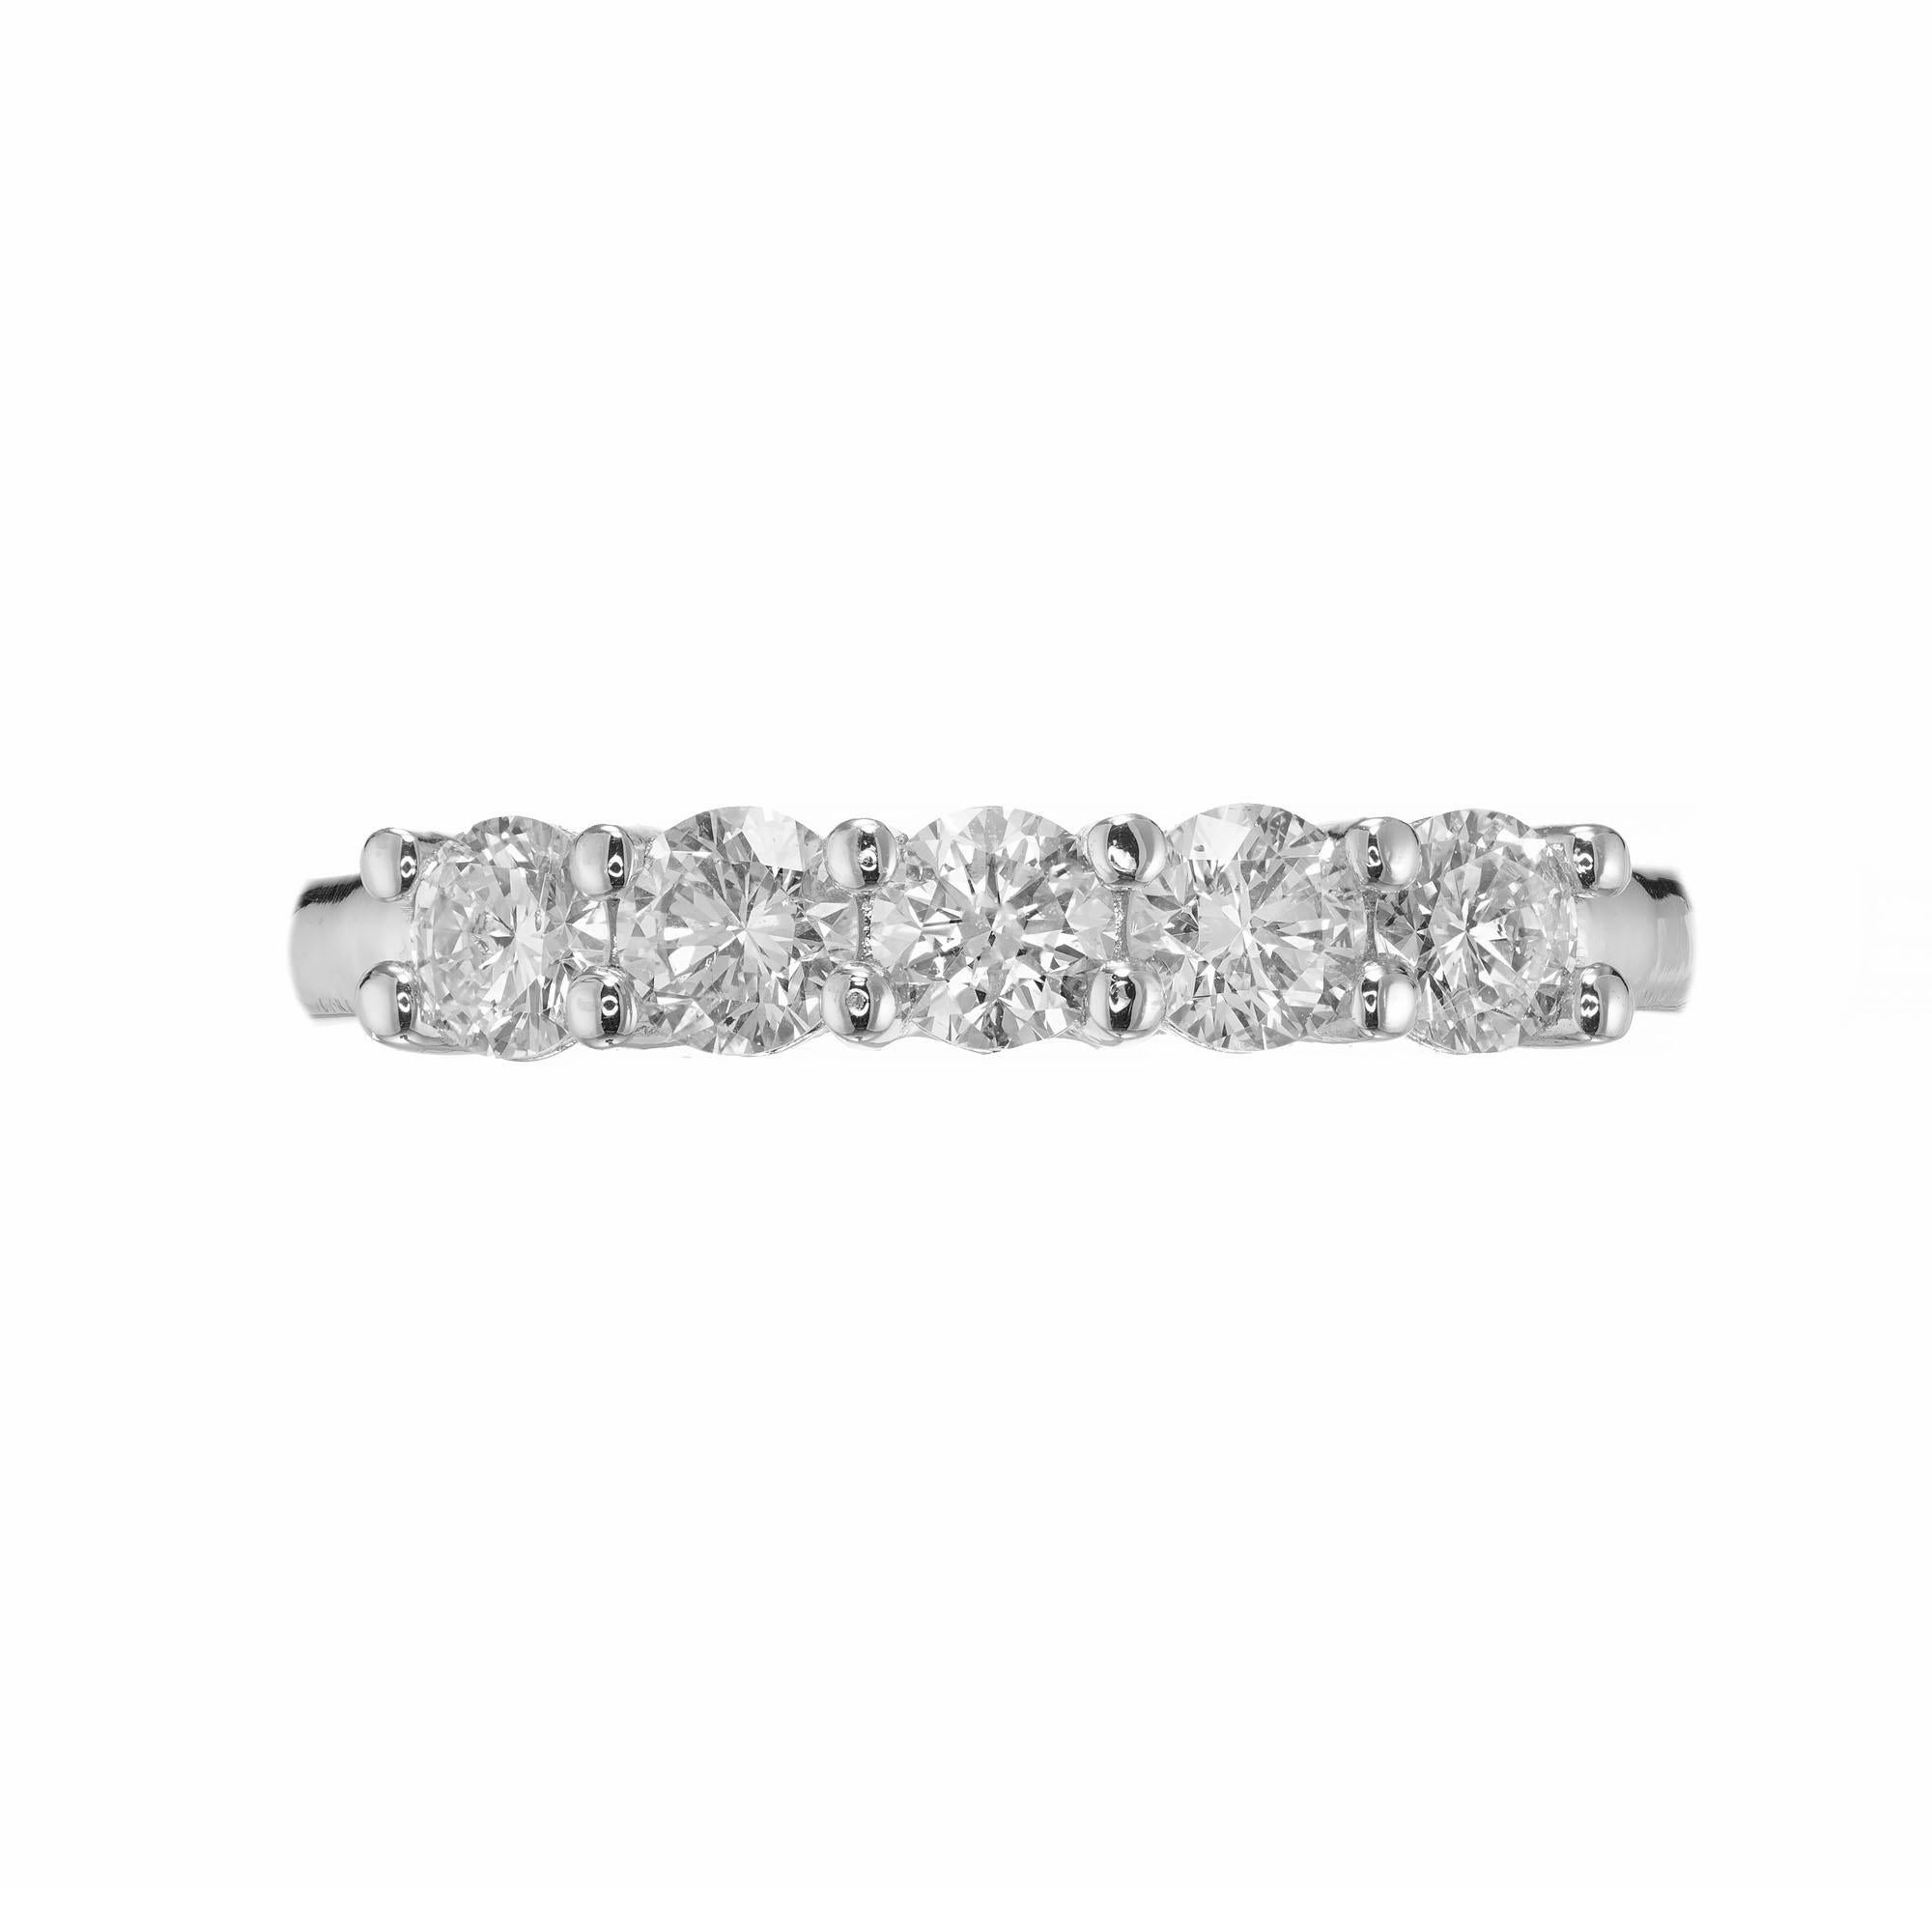 Five round brilliant cut in a classic custom common platinum prong setting. Created in the Peter Suchy Workshop.

5 round brilliant cut diamonds, G-H VS-SI approx. .54cts
Size 6.5 and sizable 
Platinum 
Stamped: PLAT
4.5 grams
Width at top: